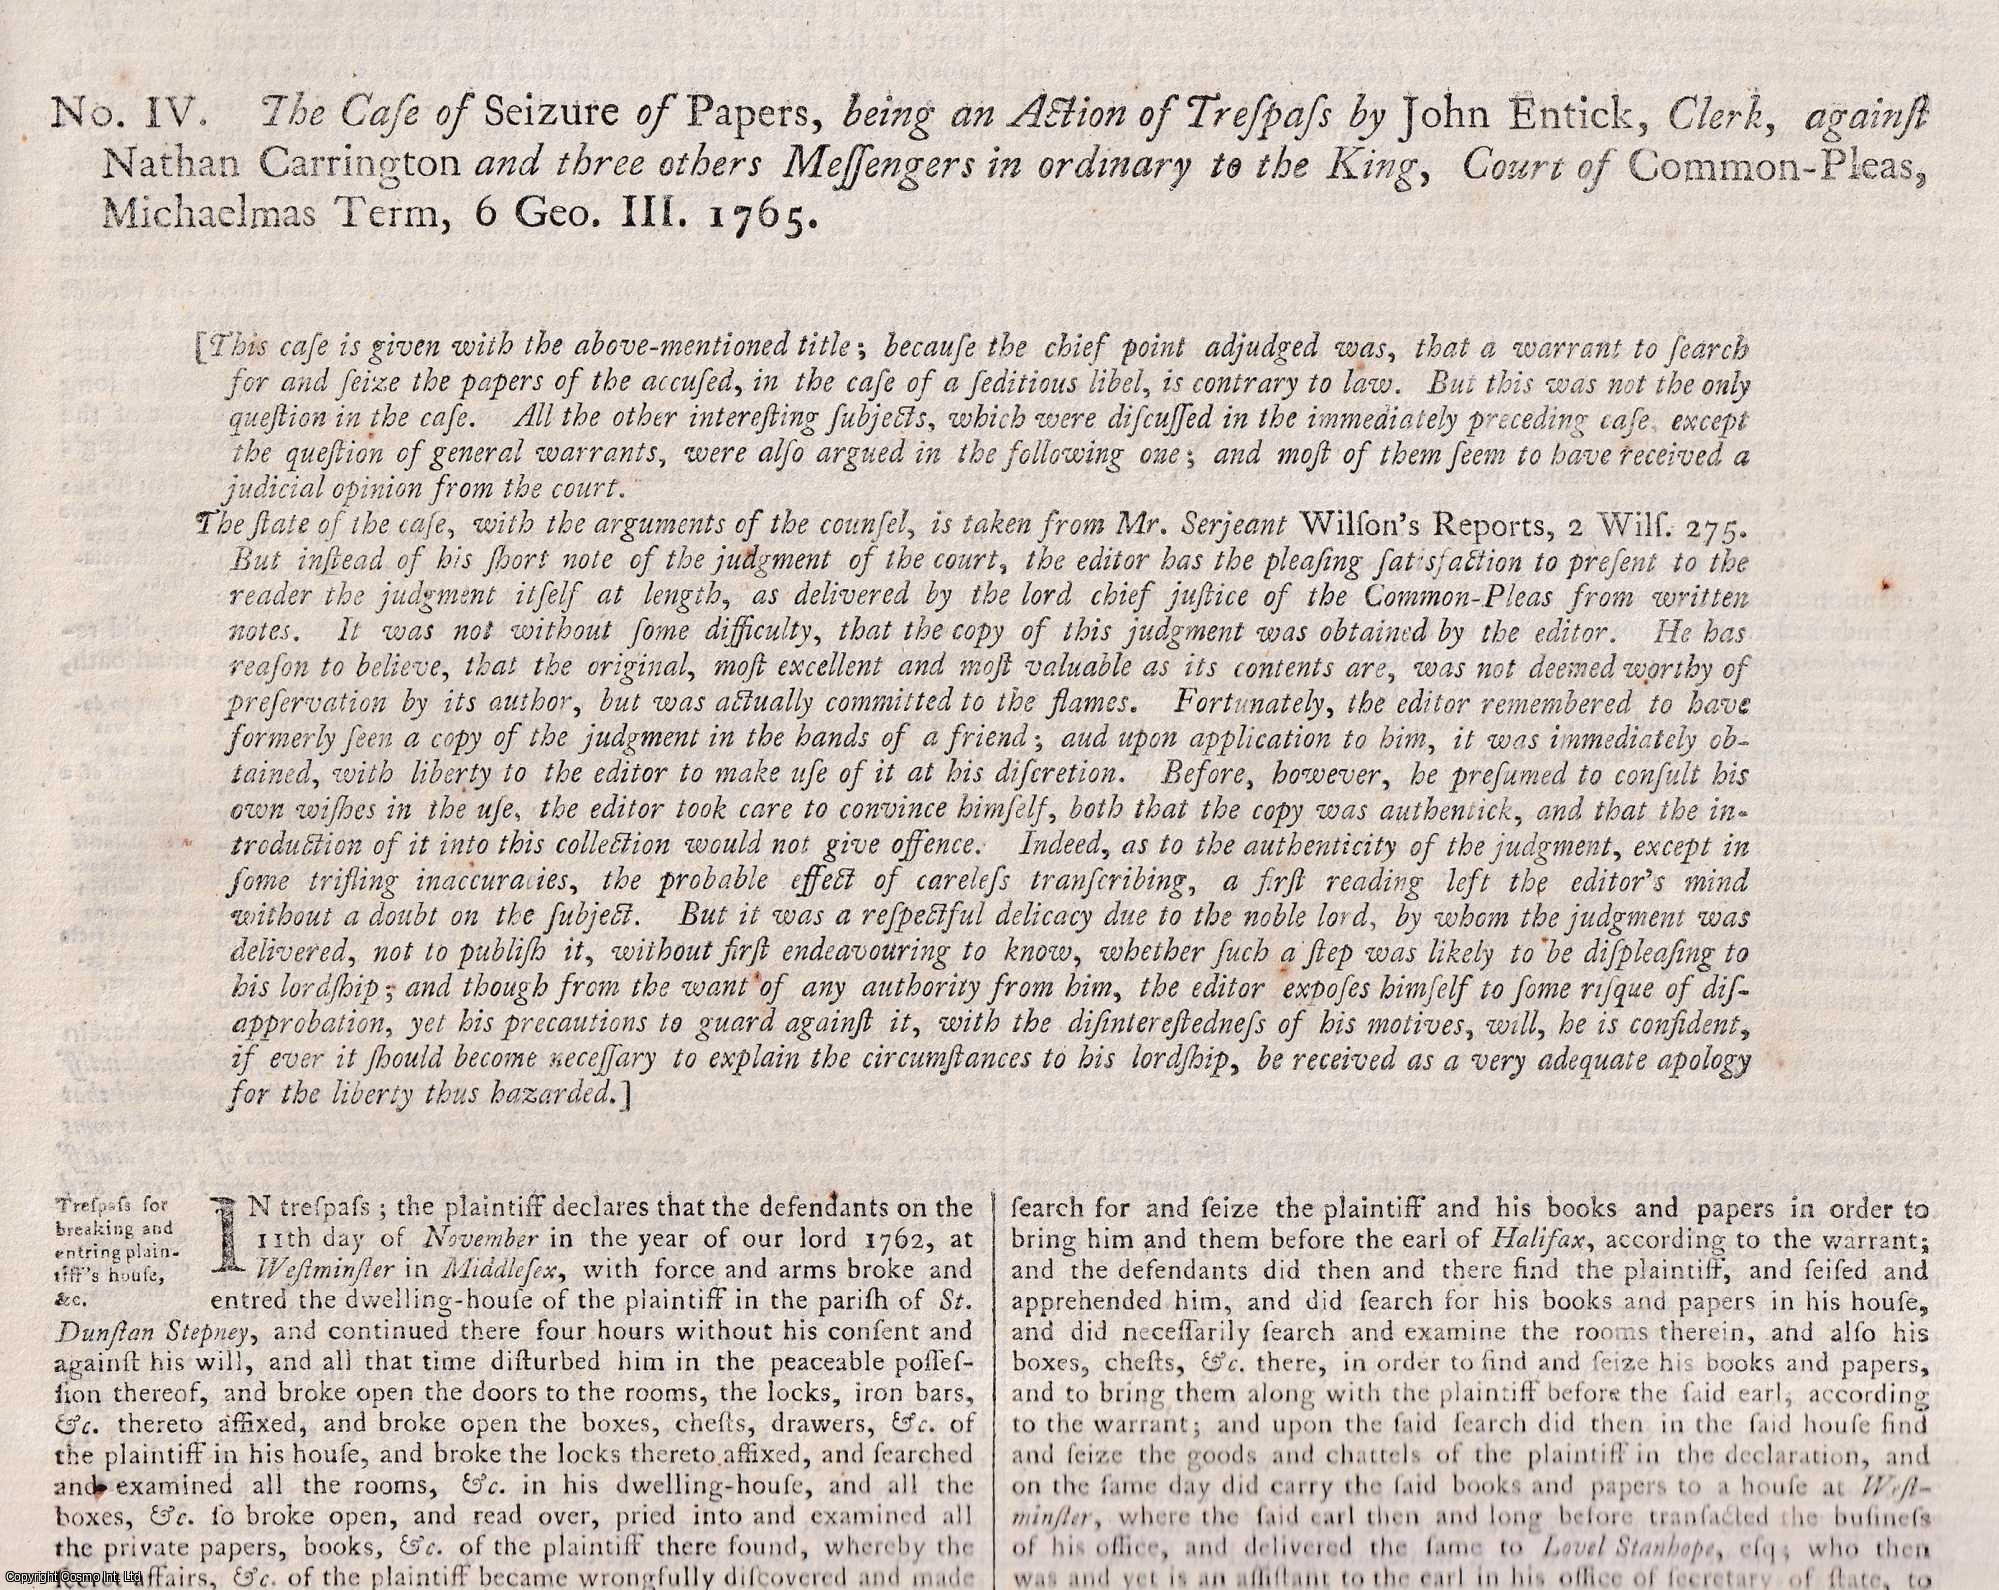 [Trial] - SEDITIOUS LIBEL JUDGMENT, 1765. The Case of Seizure of Papers, being an Action of Trespass by John Entick, Clerk, against Nathan Carrington and three others Messengers in ordinary to the King, Court of Common Pleas, 1765. An original article from the Collected State Trials.